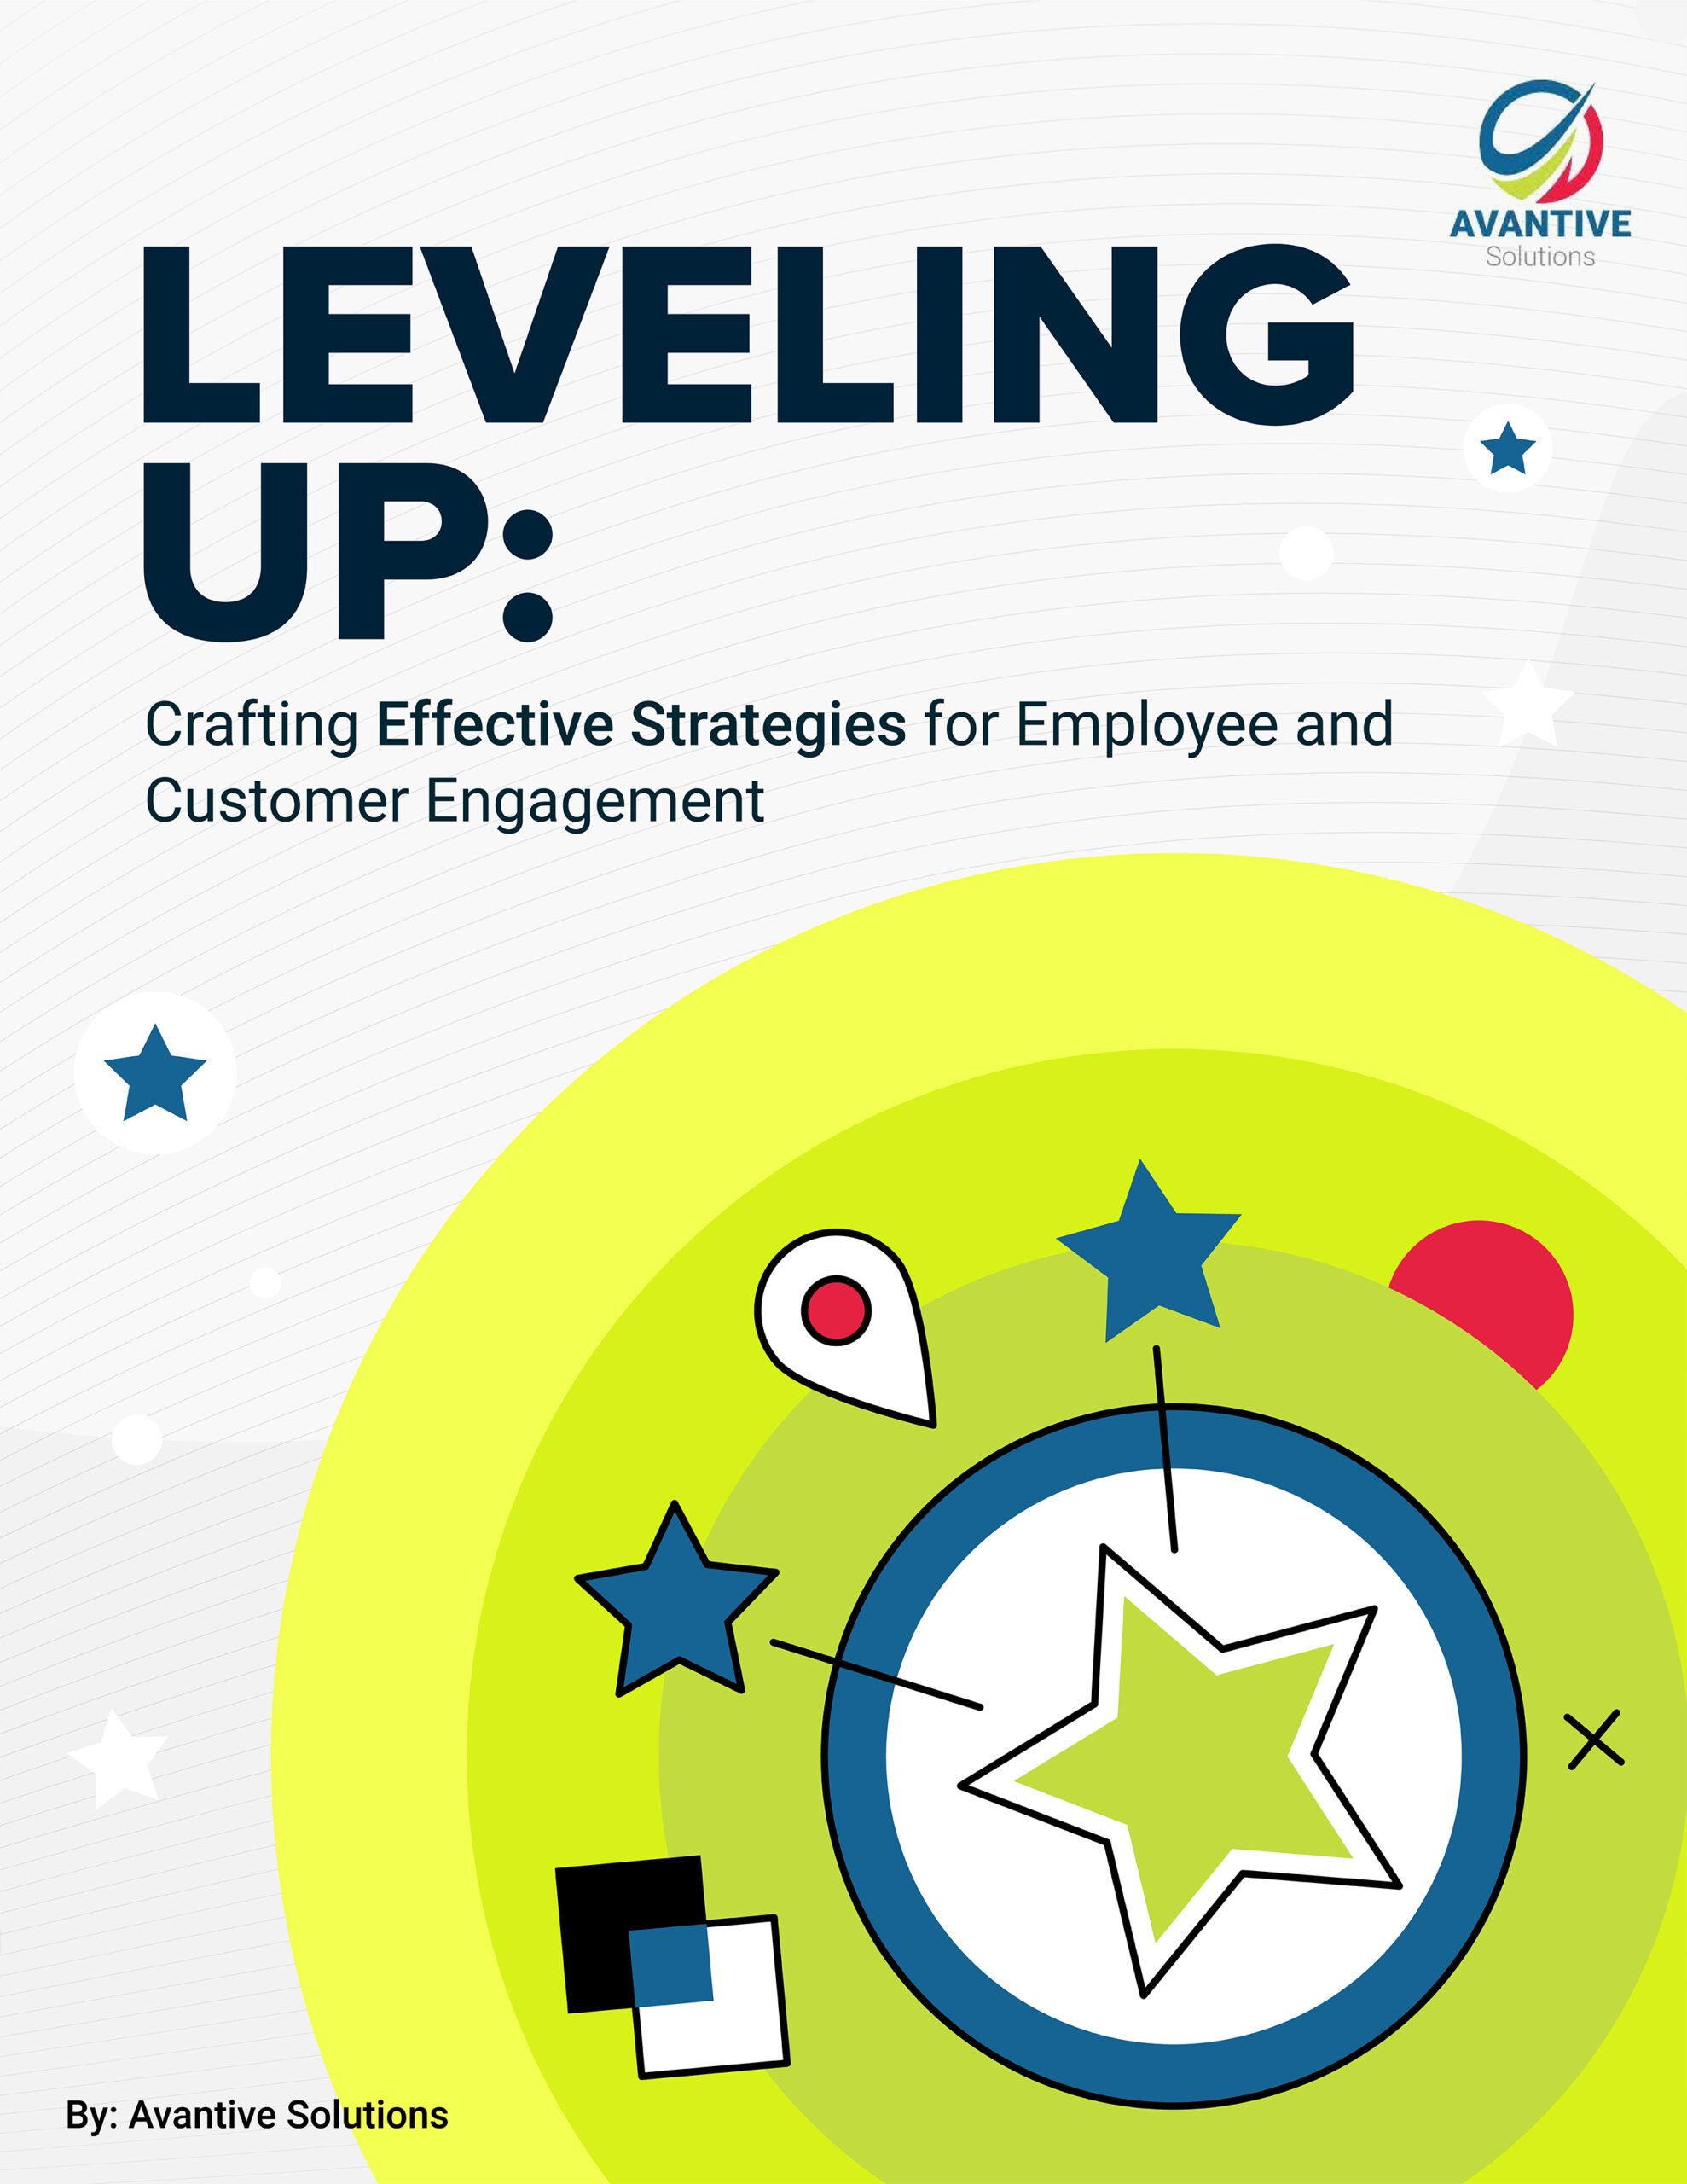 Leveling Up: Crafting Effective Strategies for Employee and Customer Engagement